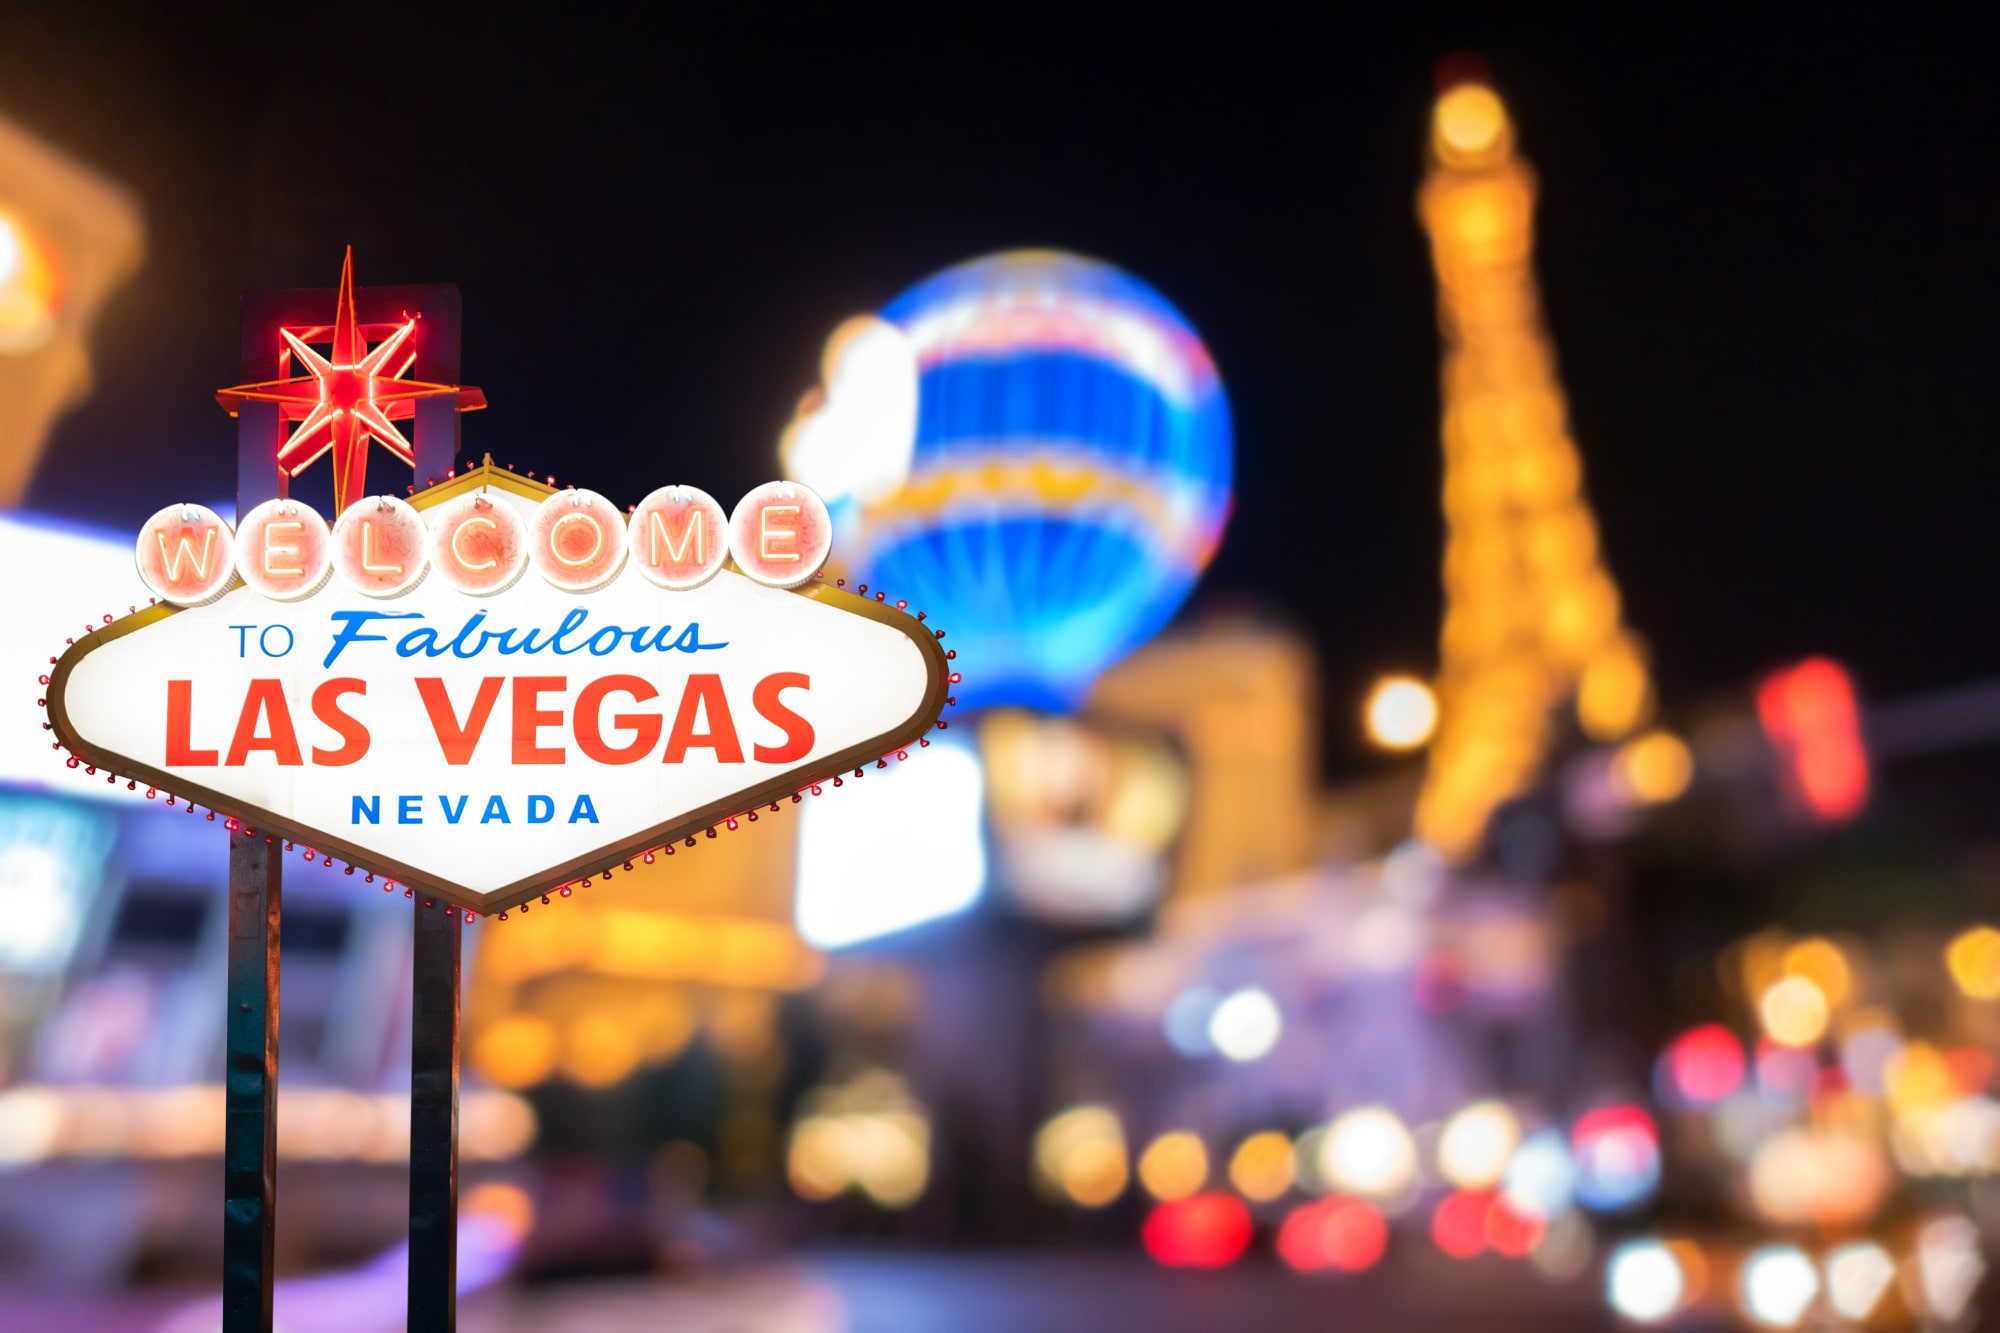 Las Vegas Real Estate: Is Now a Good Time To Invest?